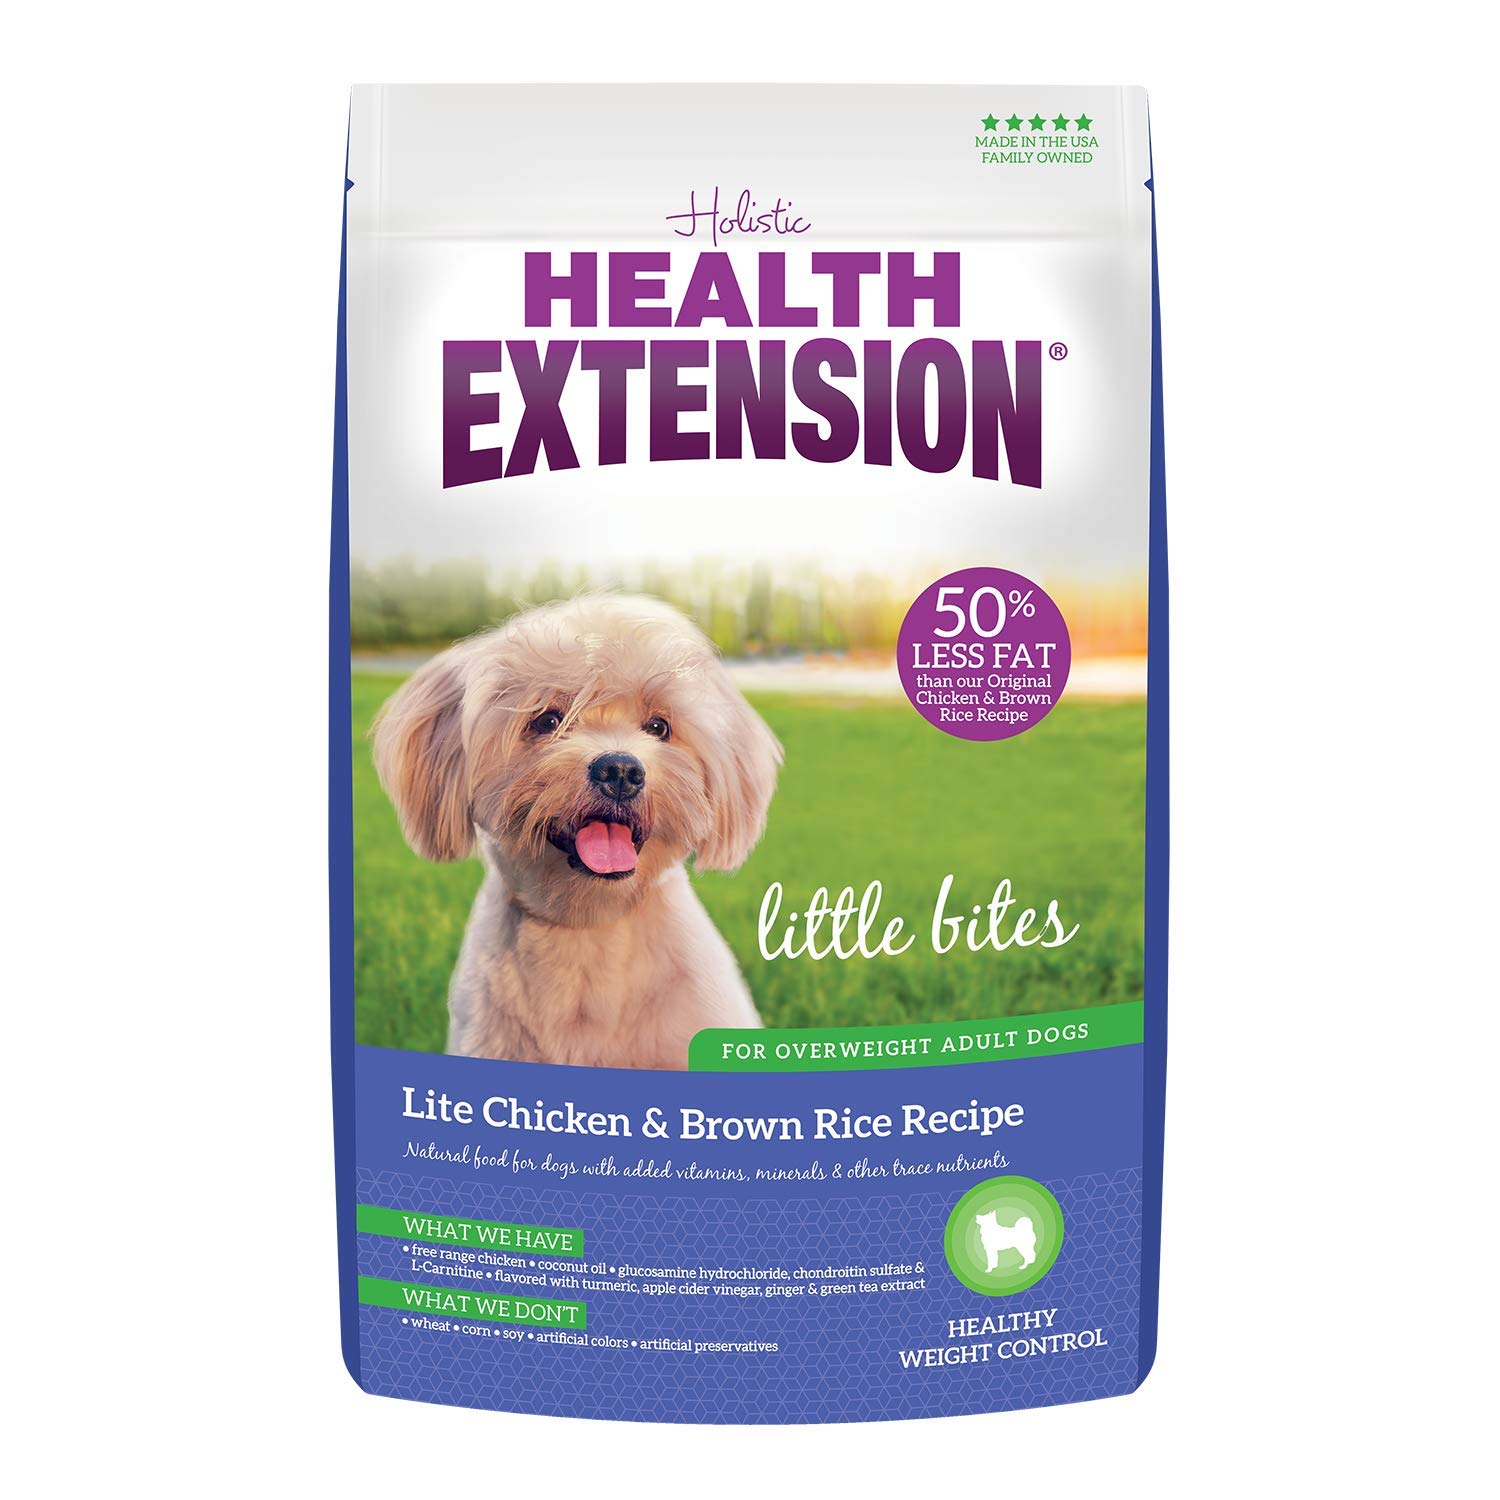 Health extension Little Bites Dry Dog Food, Natural Food with Added Vitamins & Minerals, Suitable for Teacup, Toy & Miniature Dogs, Chicken & Brown Rice Recipe